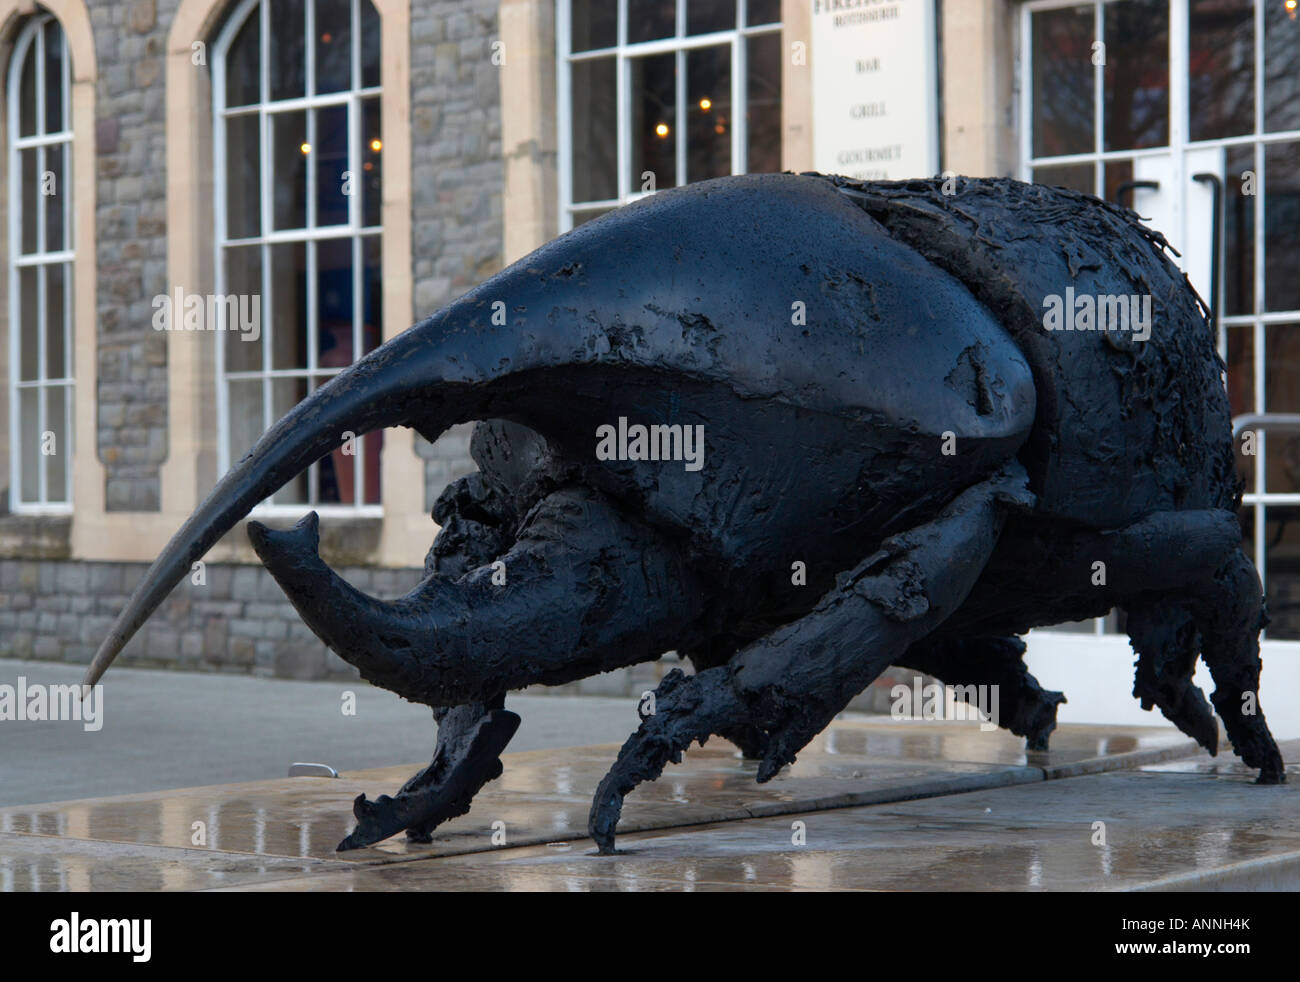 Beetle sculpture by Nicola Hicks in Anchor Square Bristol England Stock Photo